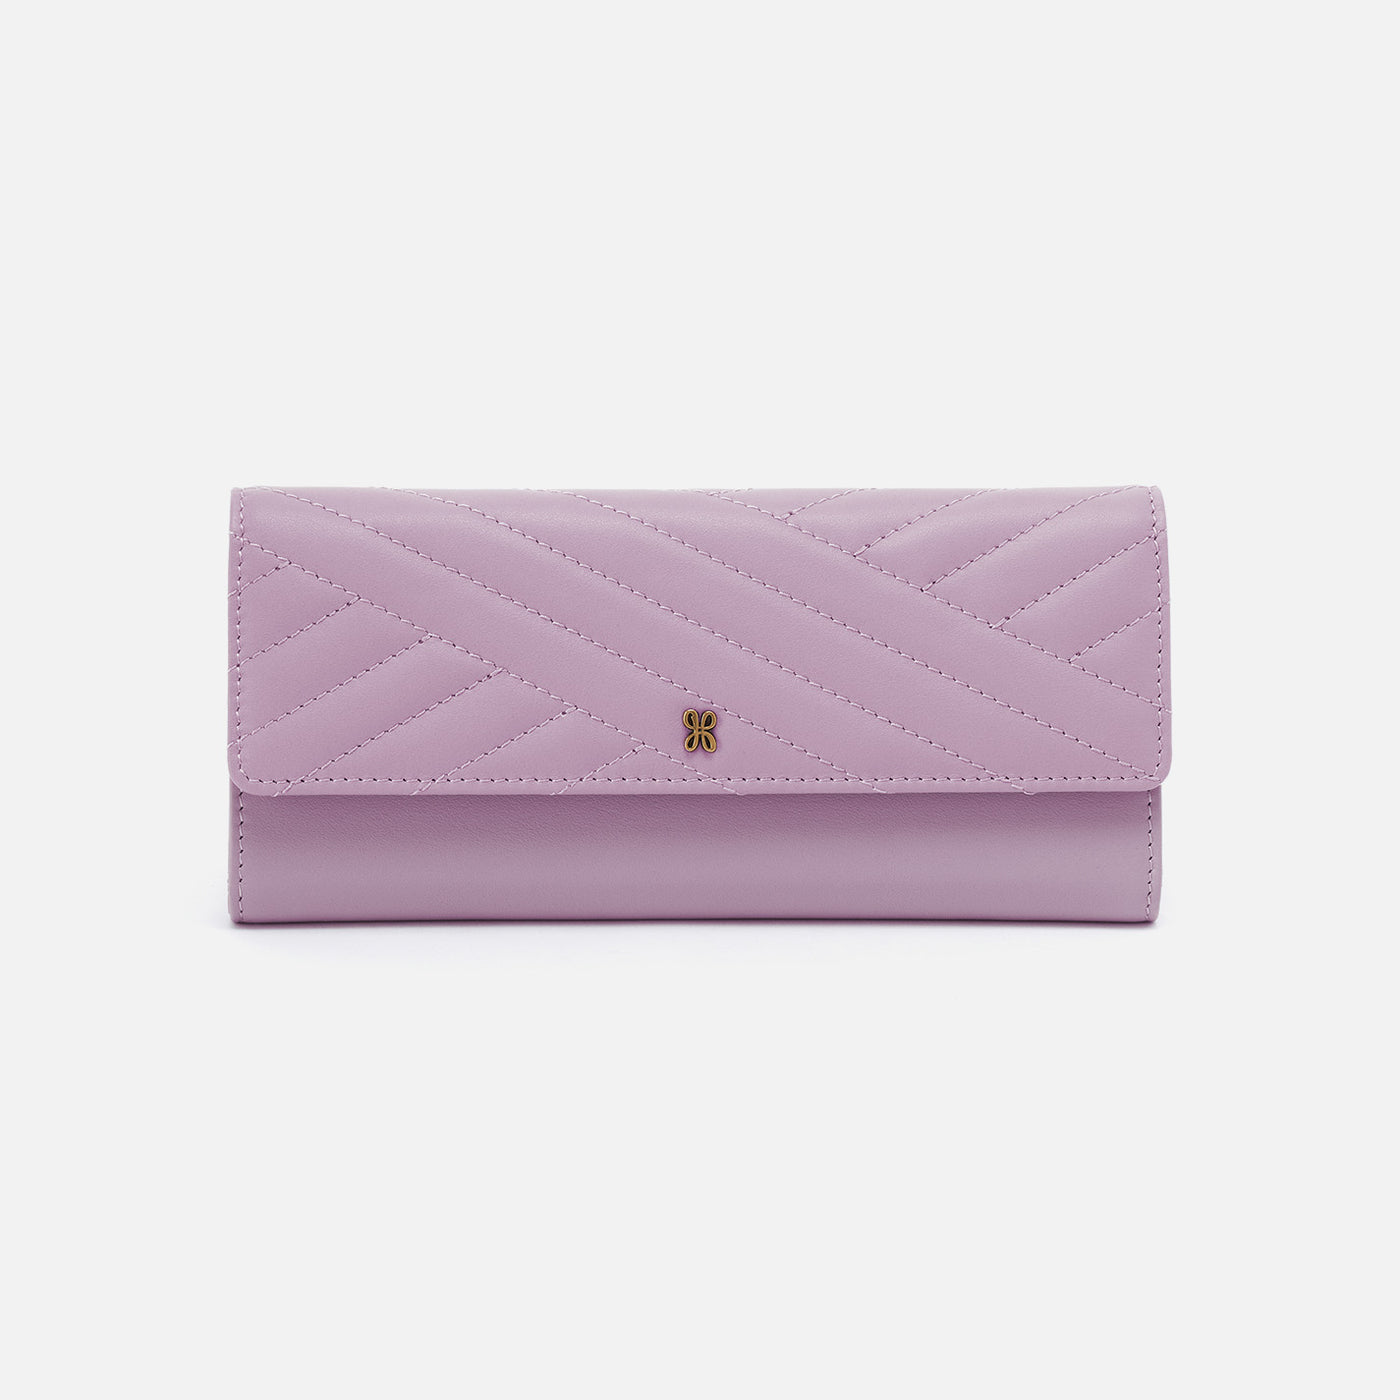 Jill Large Trifold Continental Wallet in Quilted Silk Napa Leather - Lavender